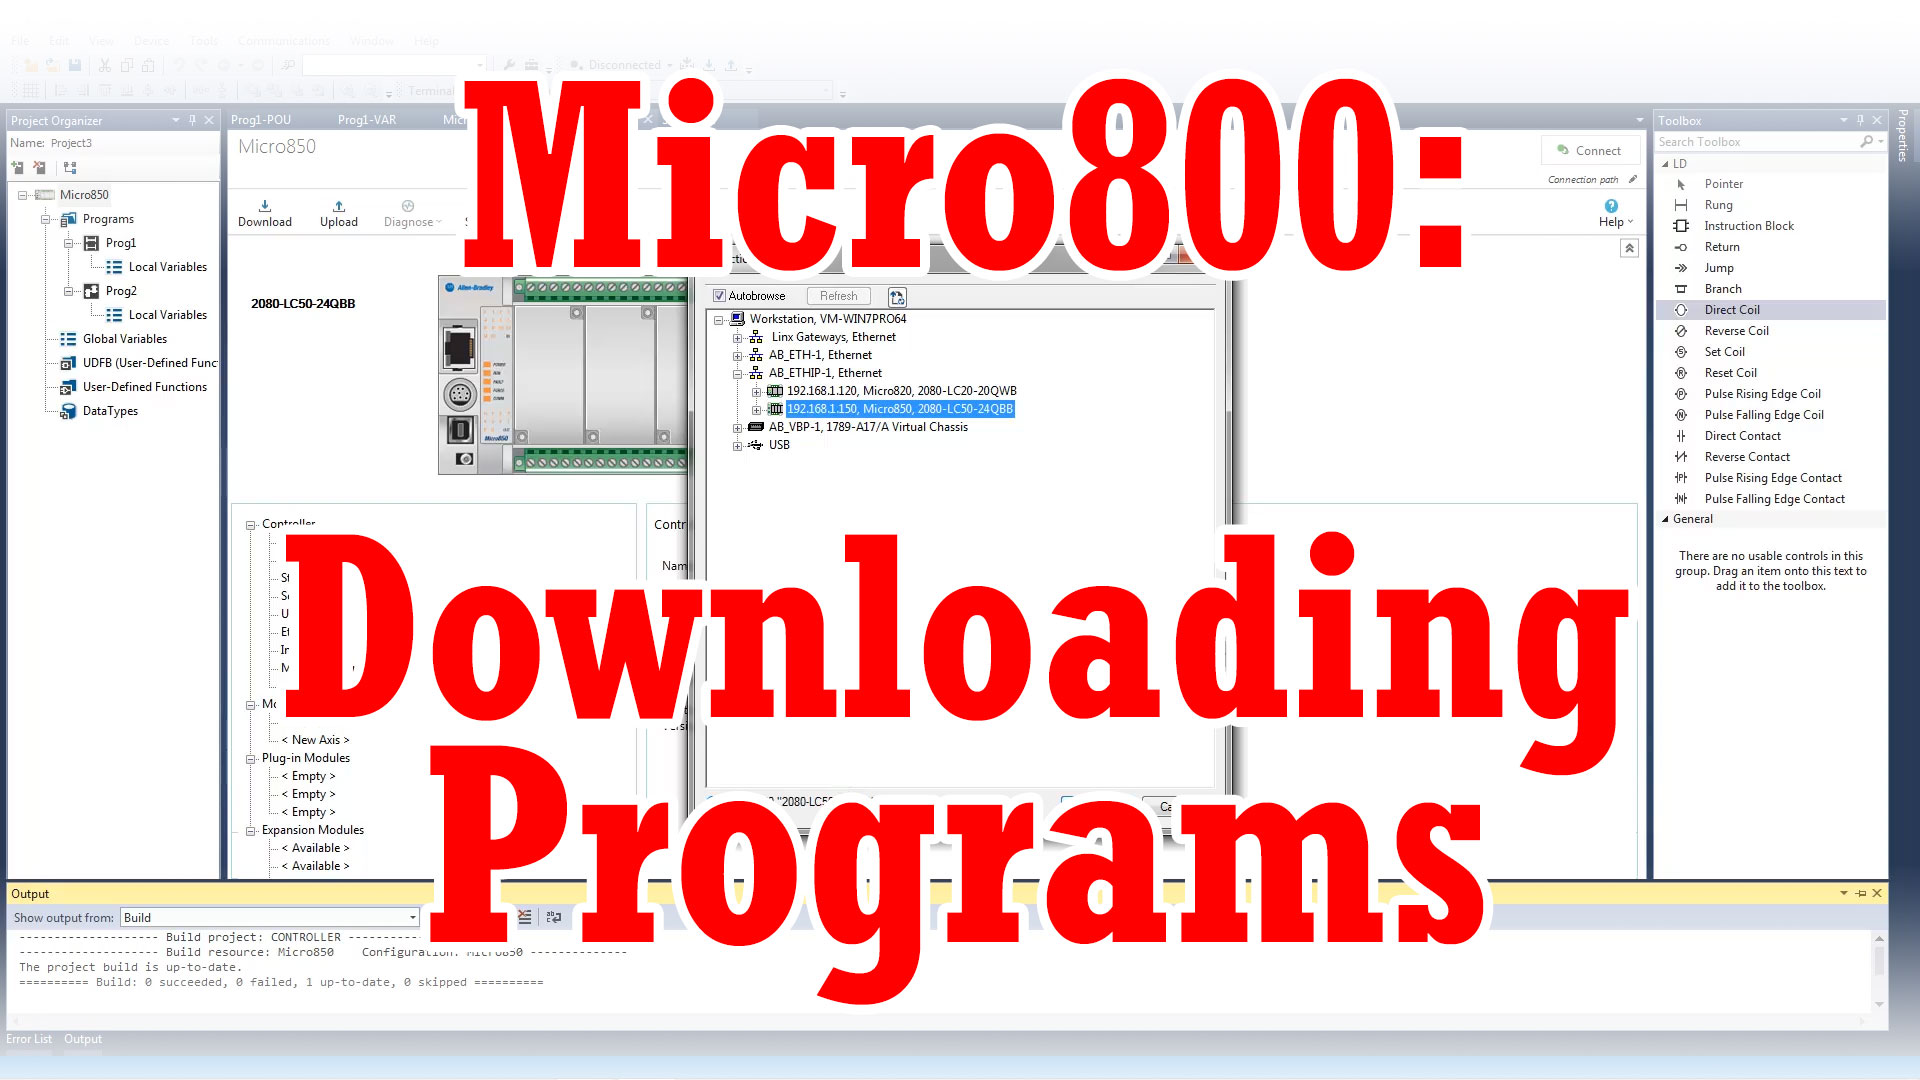 Micro800, CCW - Create and Download Ladder Logic Programs